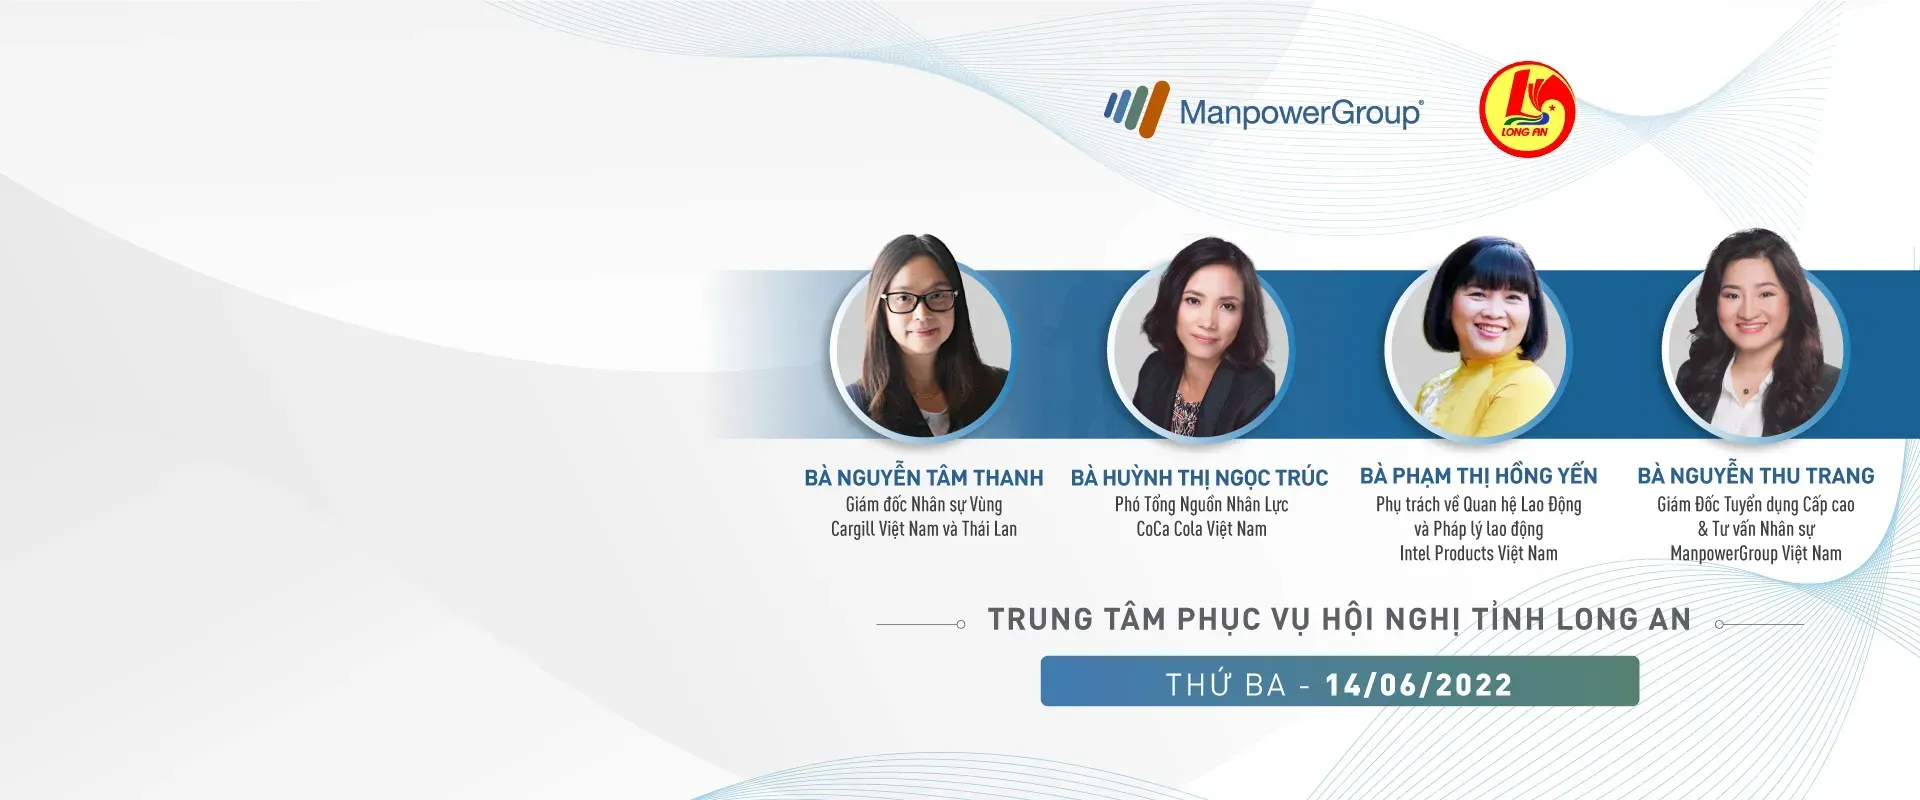 webinar banner upskilling for managers in the next normal mr nguyen xuan son manpower vietnam